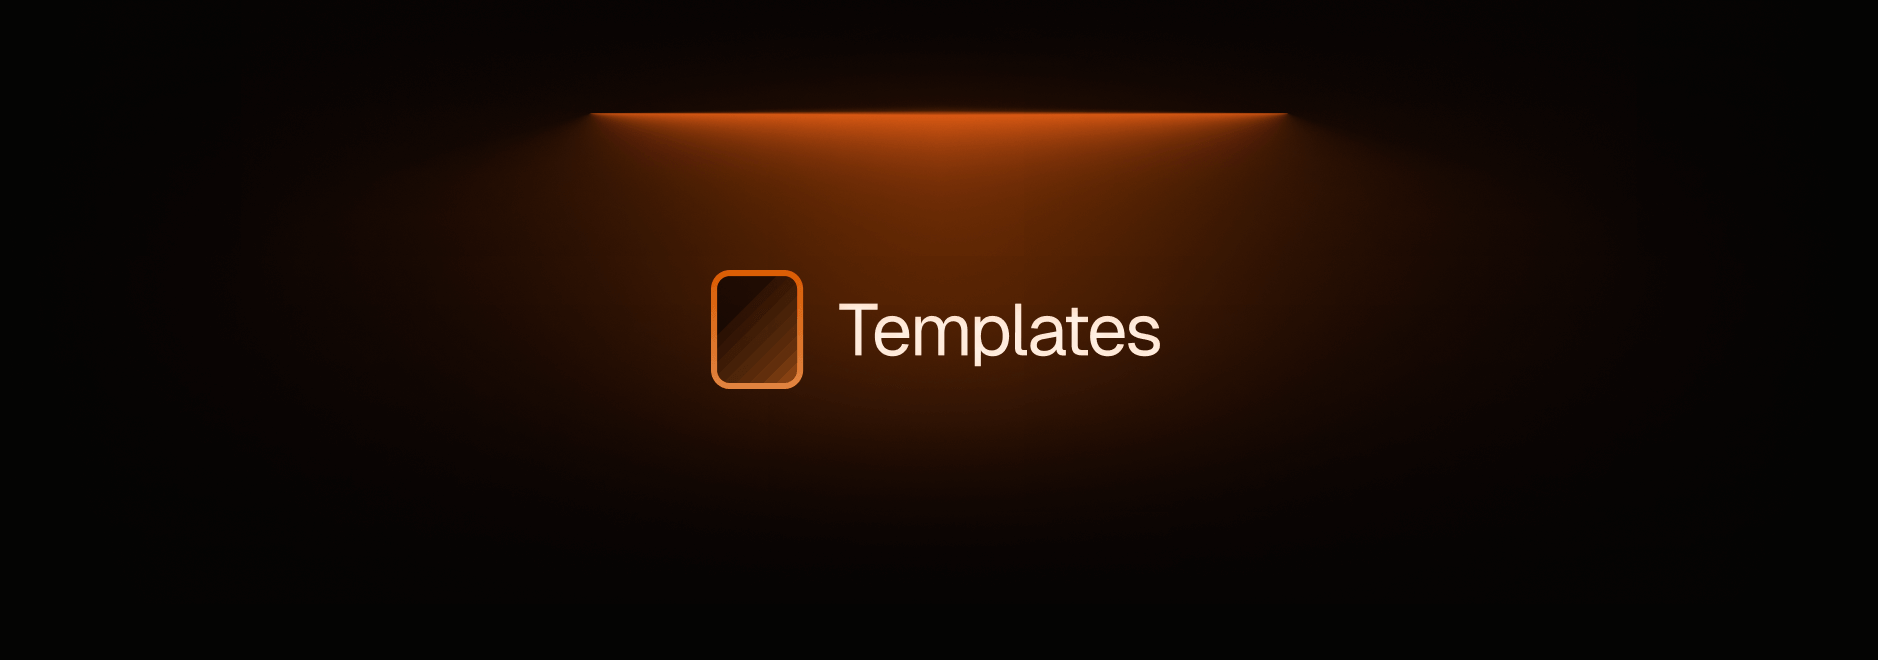 Introducing BaseHub Templates's cover